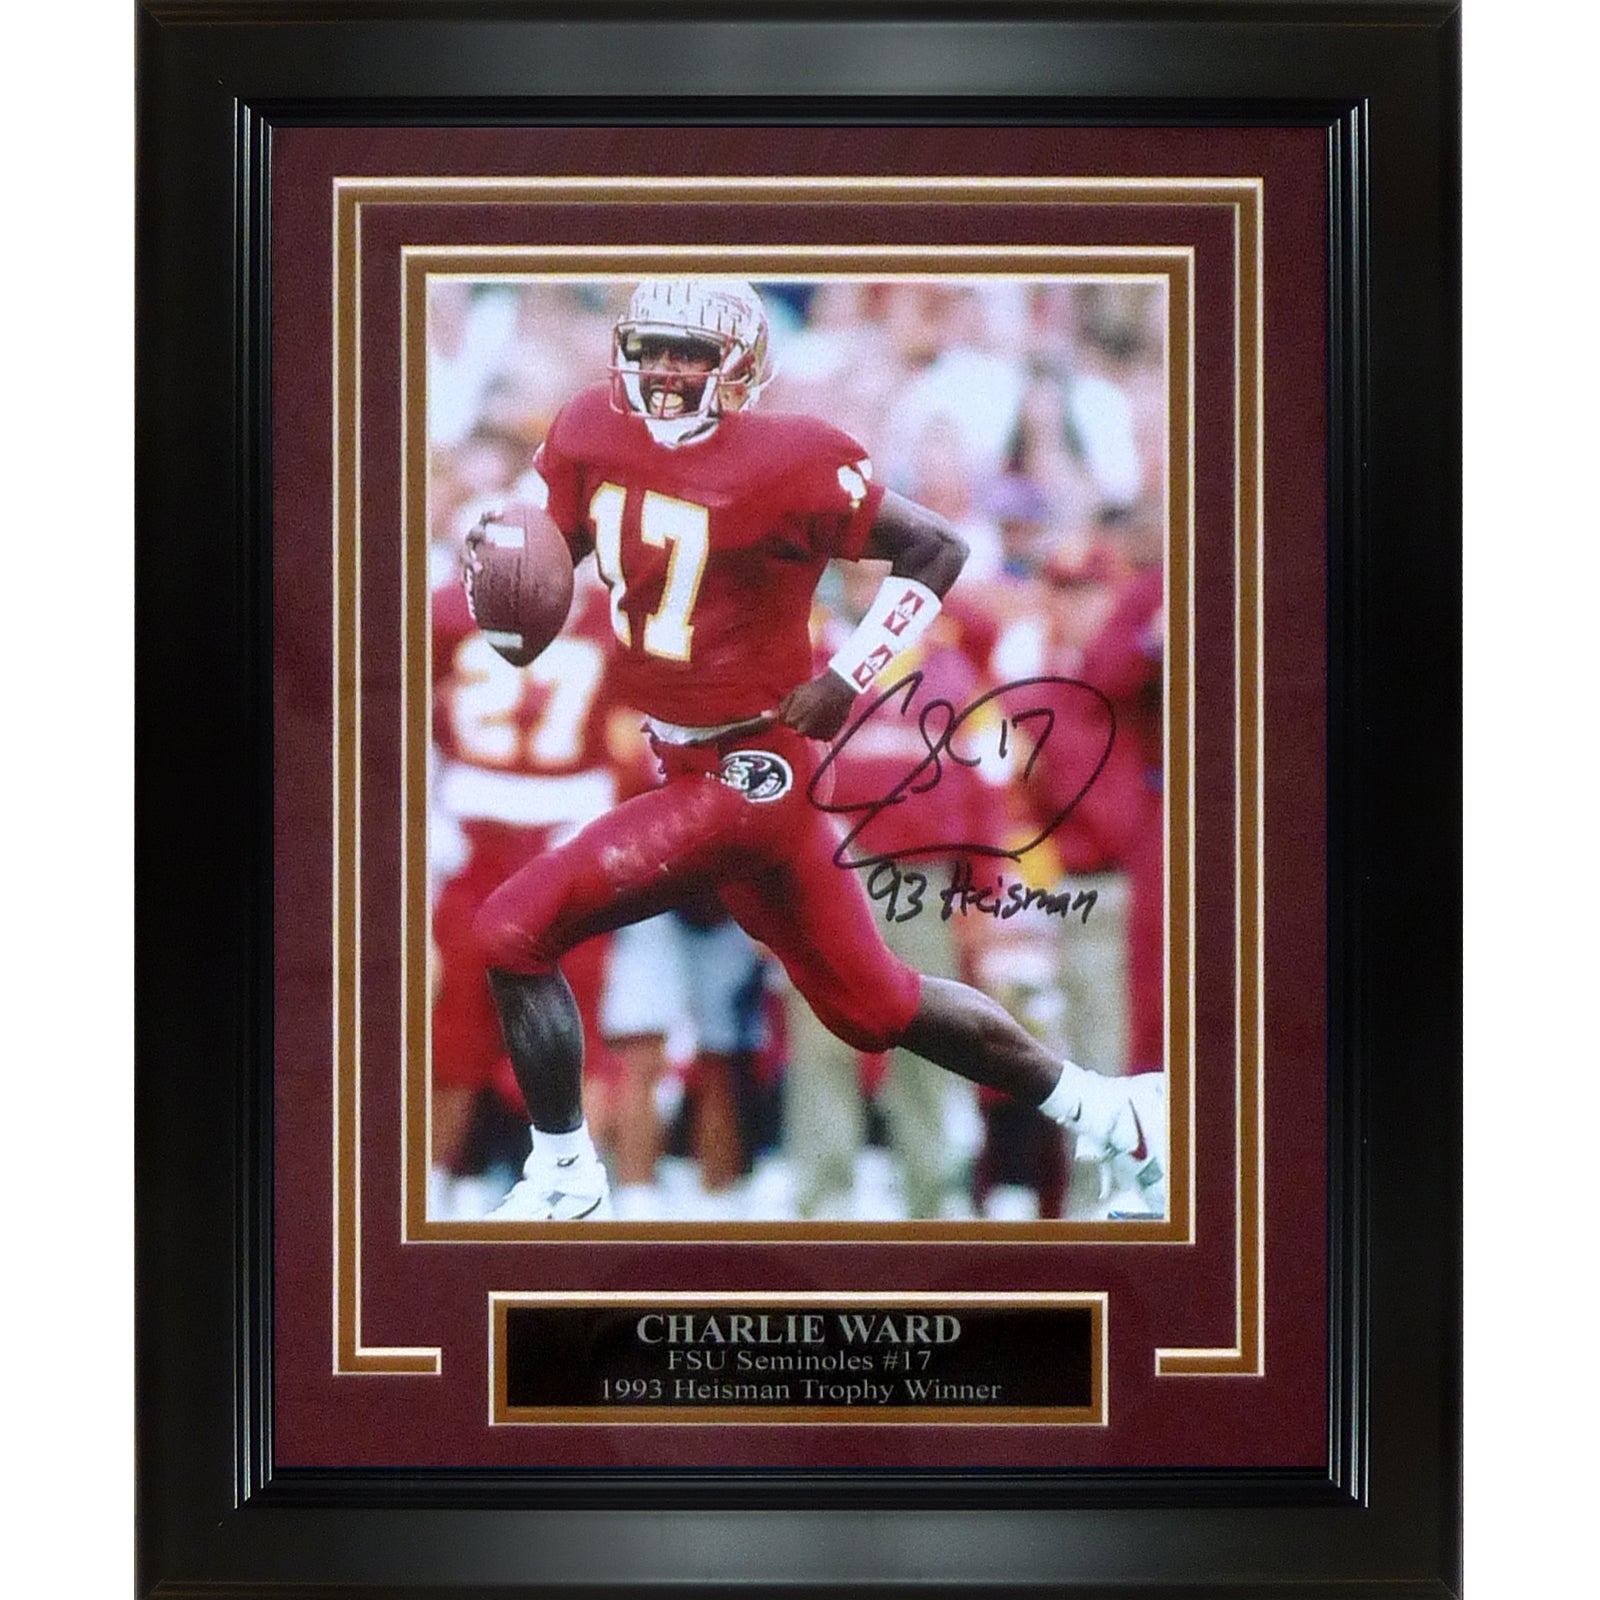 Charlie Ward Autographed FSU Florida State Seminoles Deluxe Framed 8x10 Photo